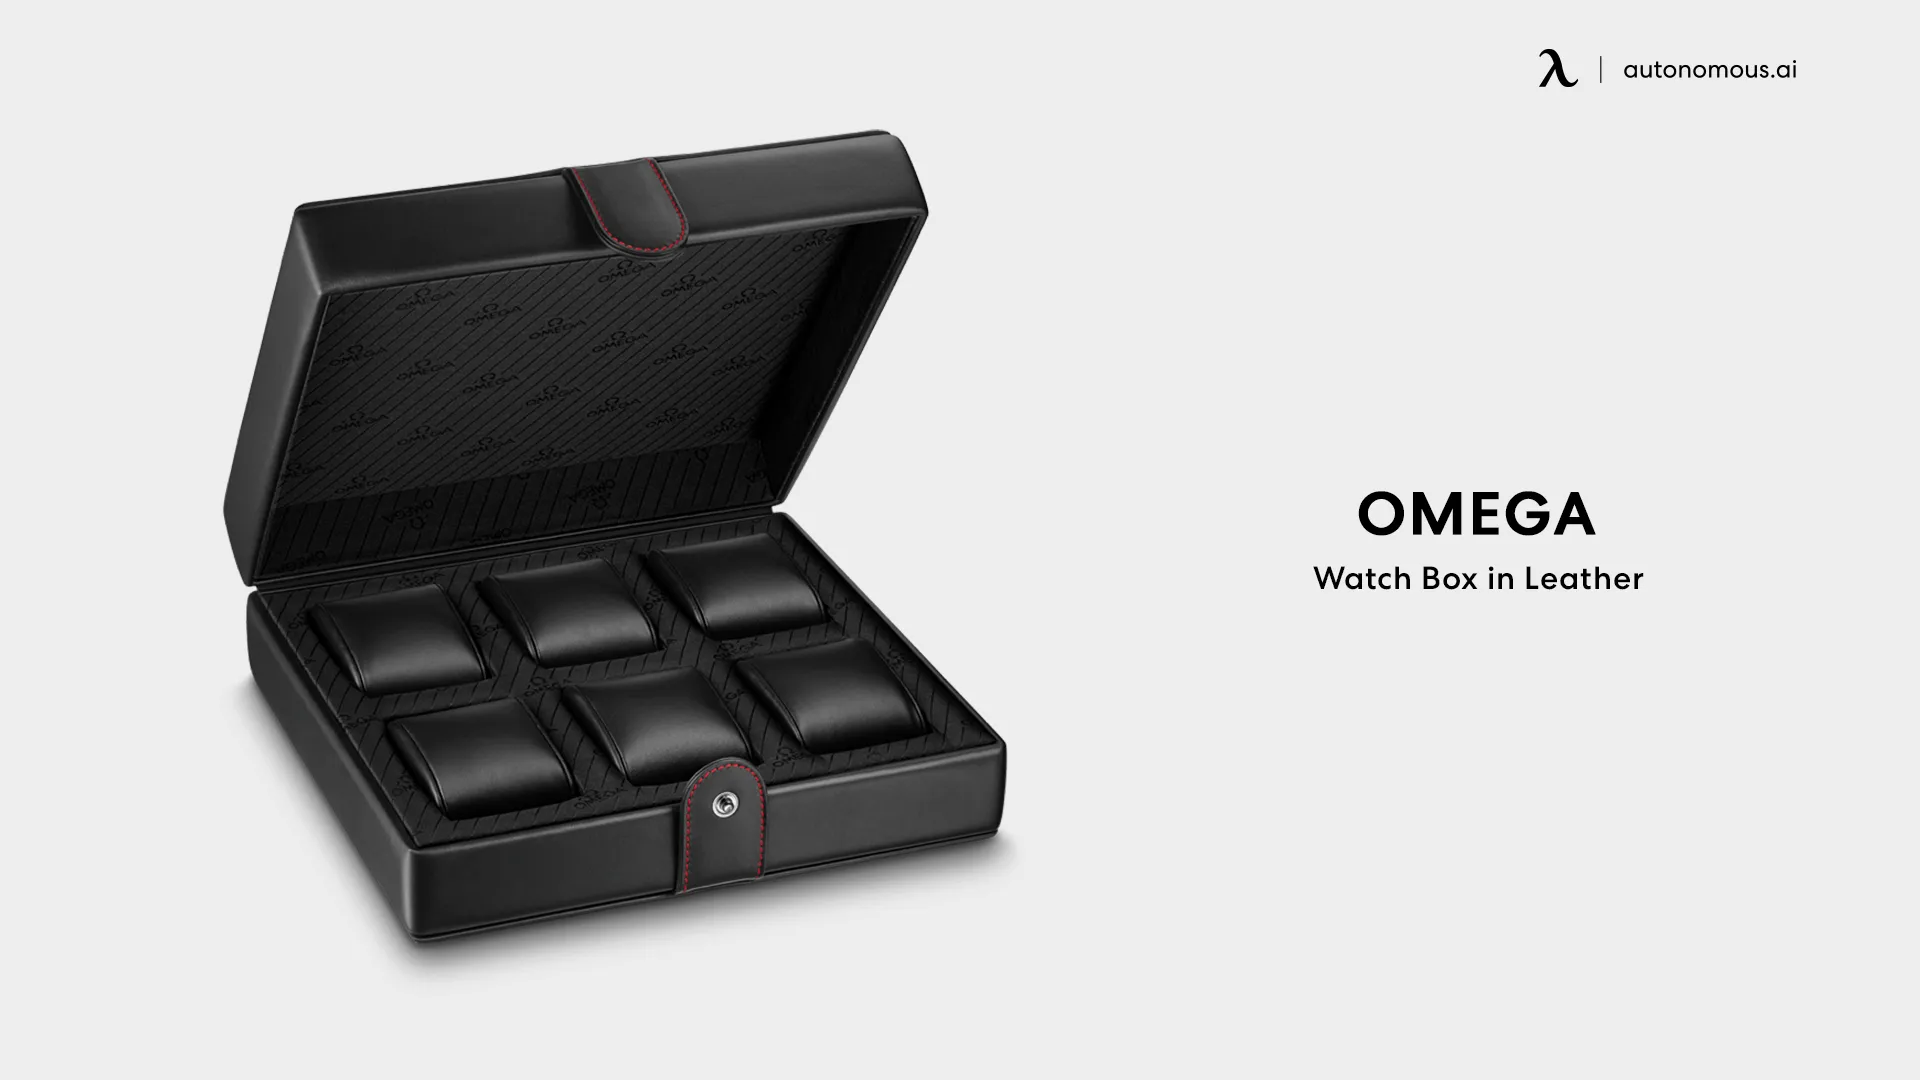 Omega's Watch Box in Leather